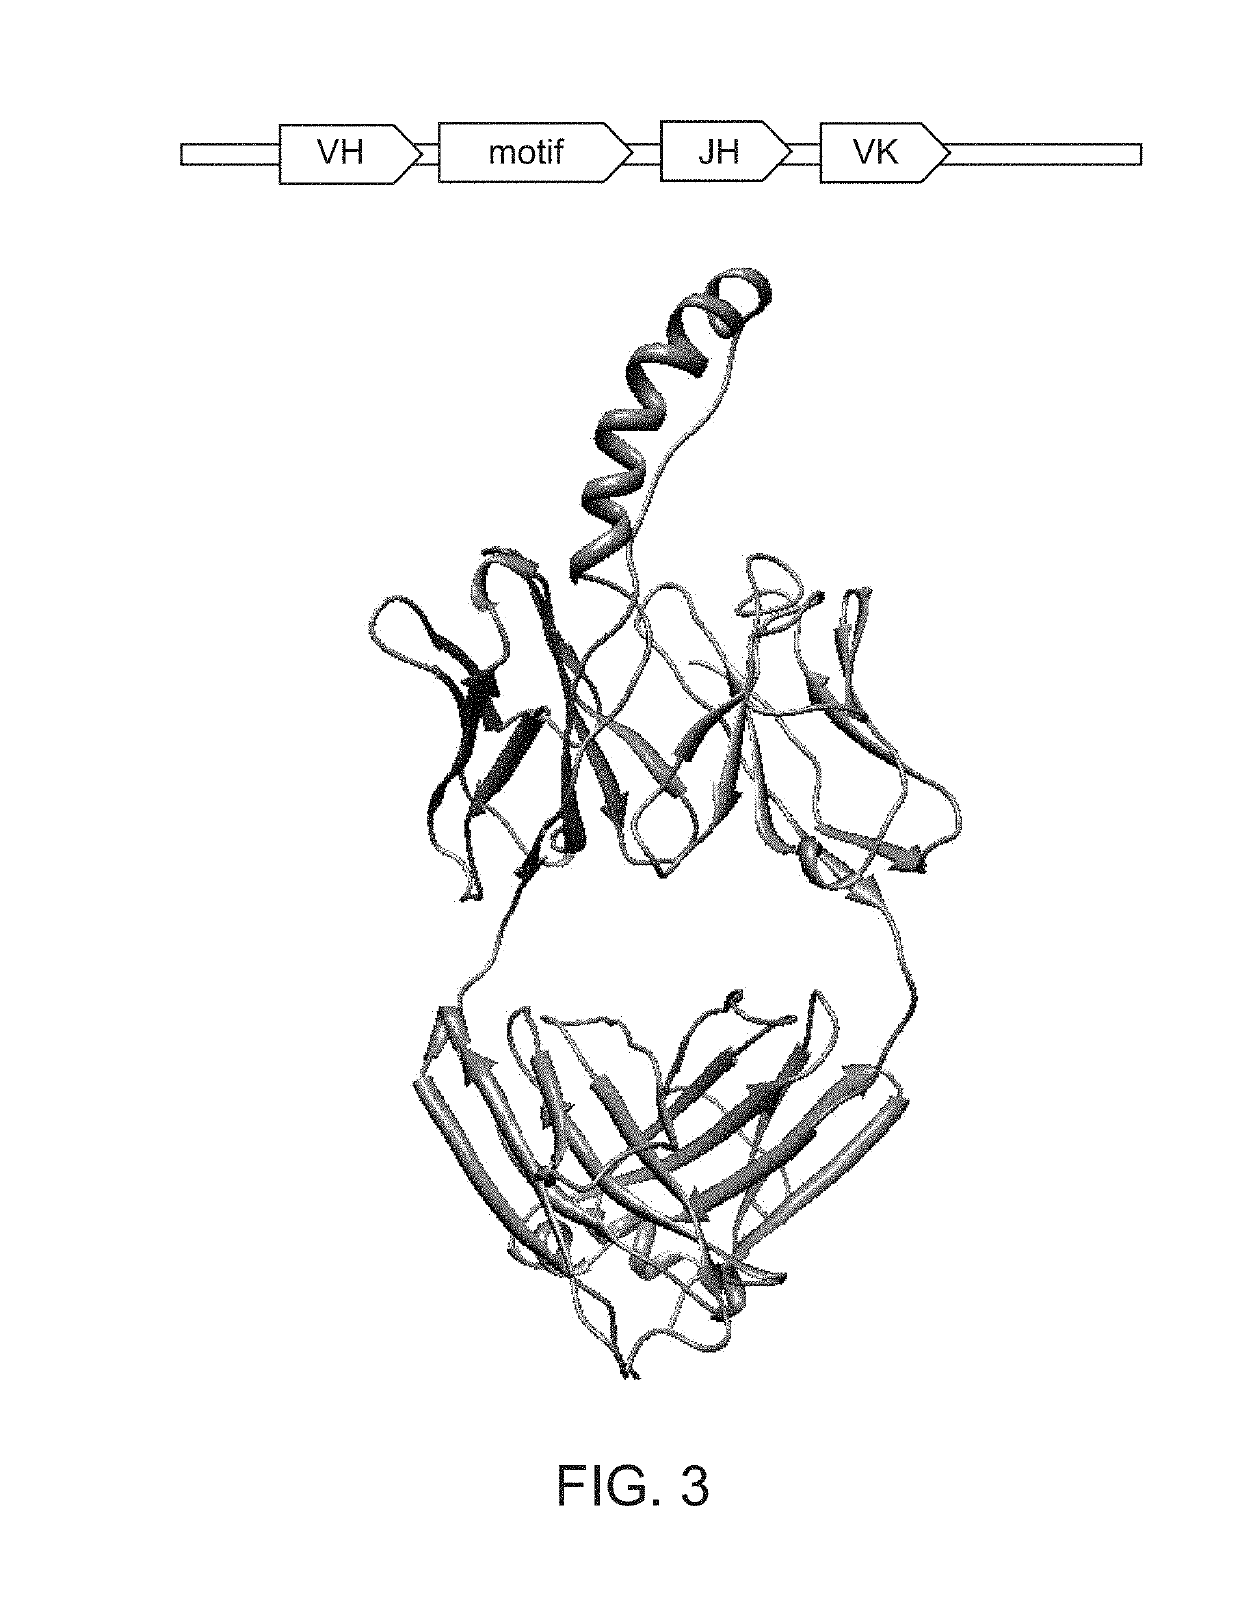 Gpcr binding proteins and synthesis thereof